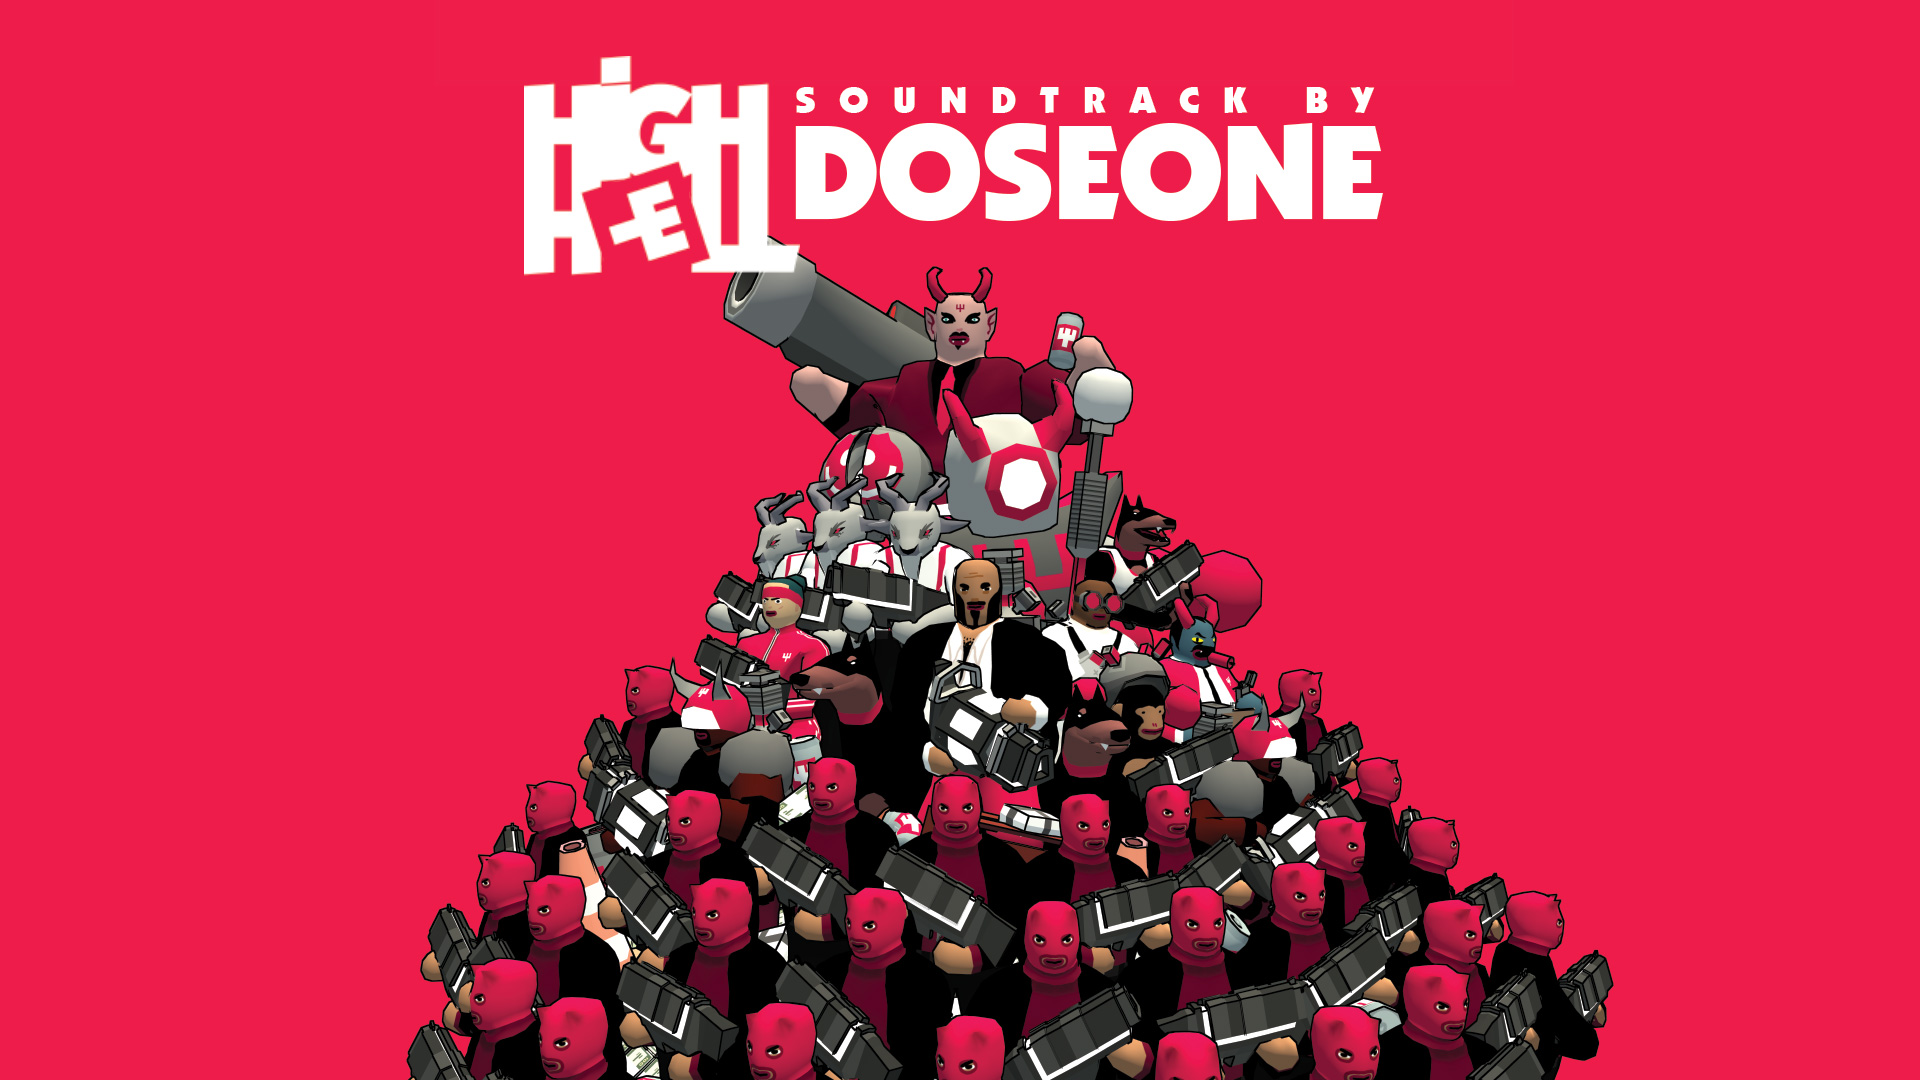 High Hell Soundtrack by Doseone Featured Screenshot #1